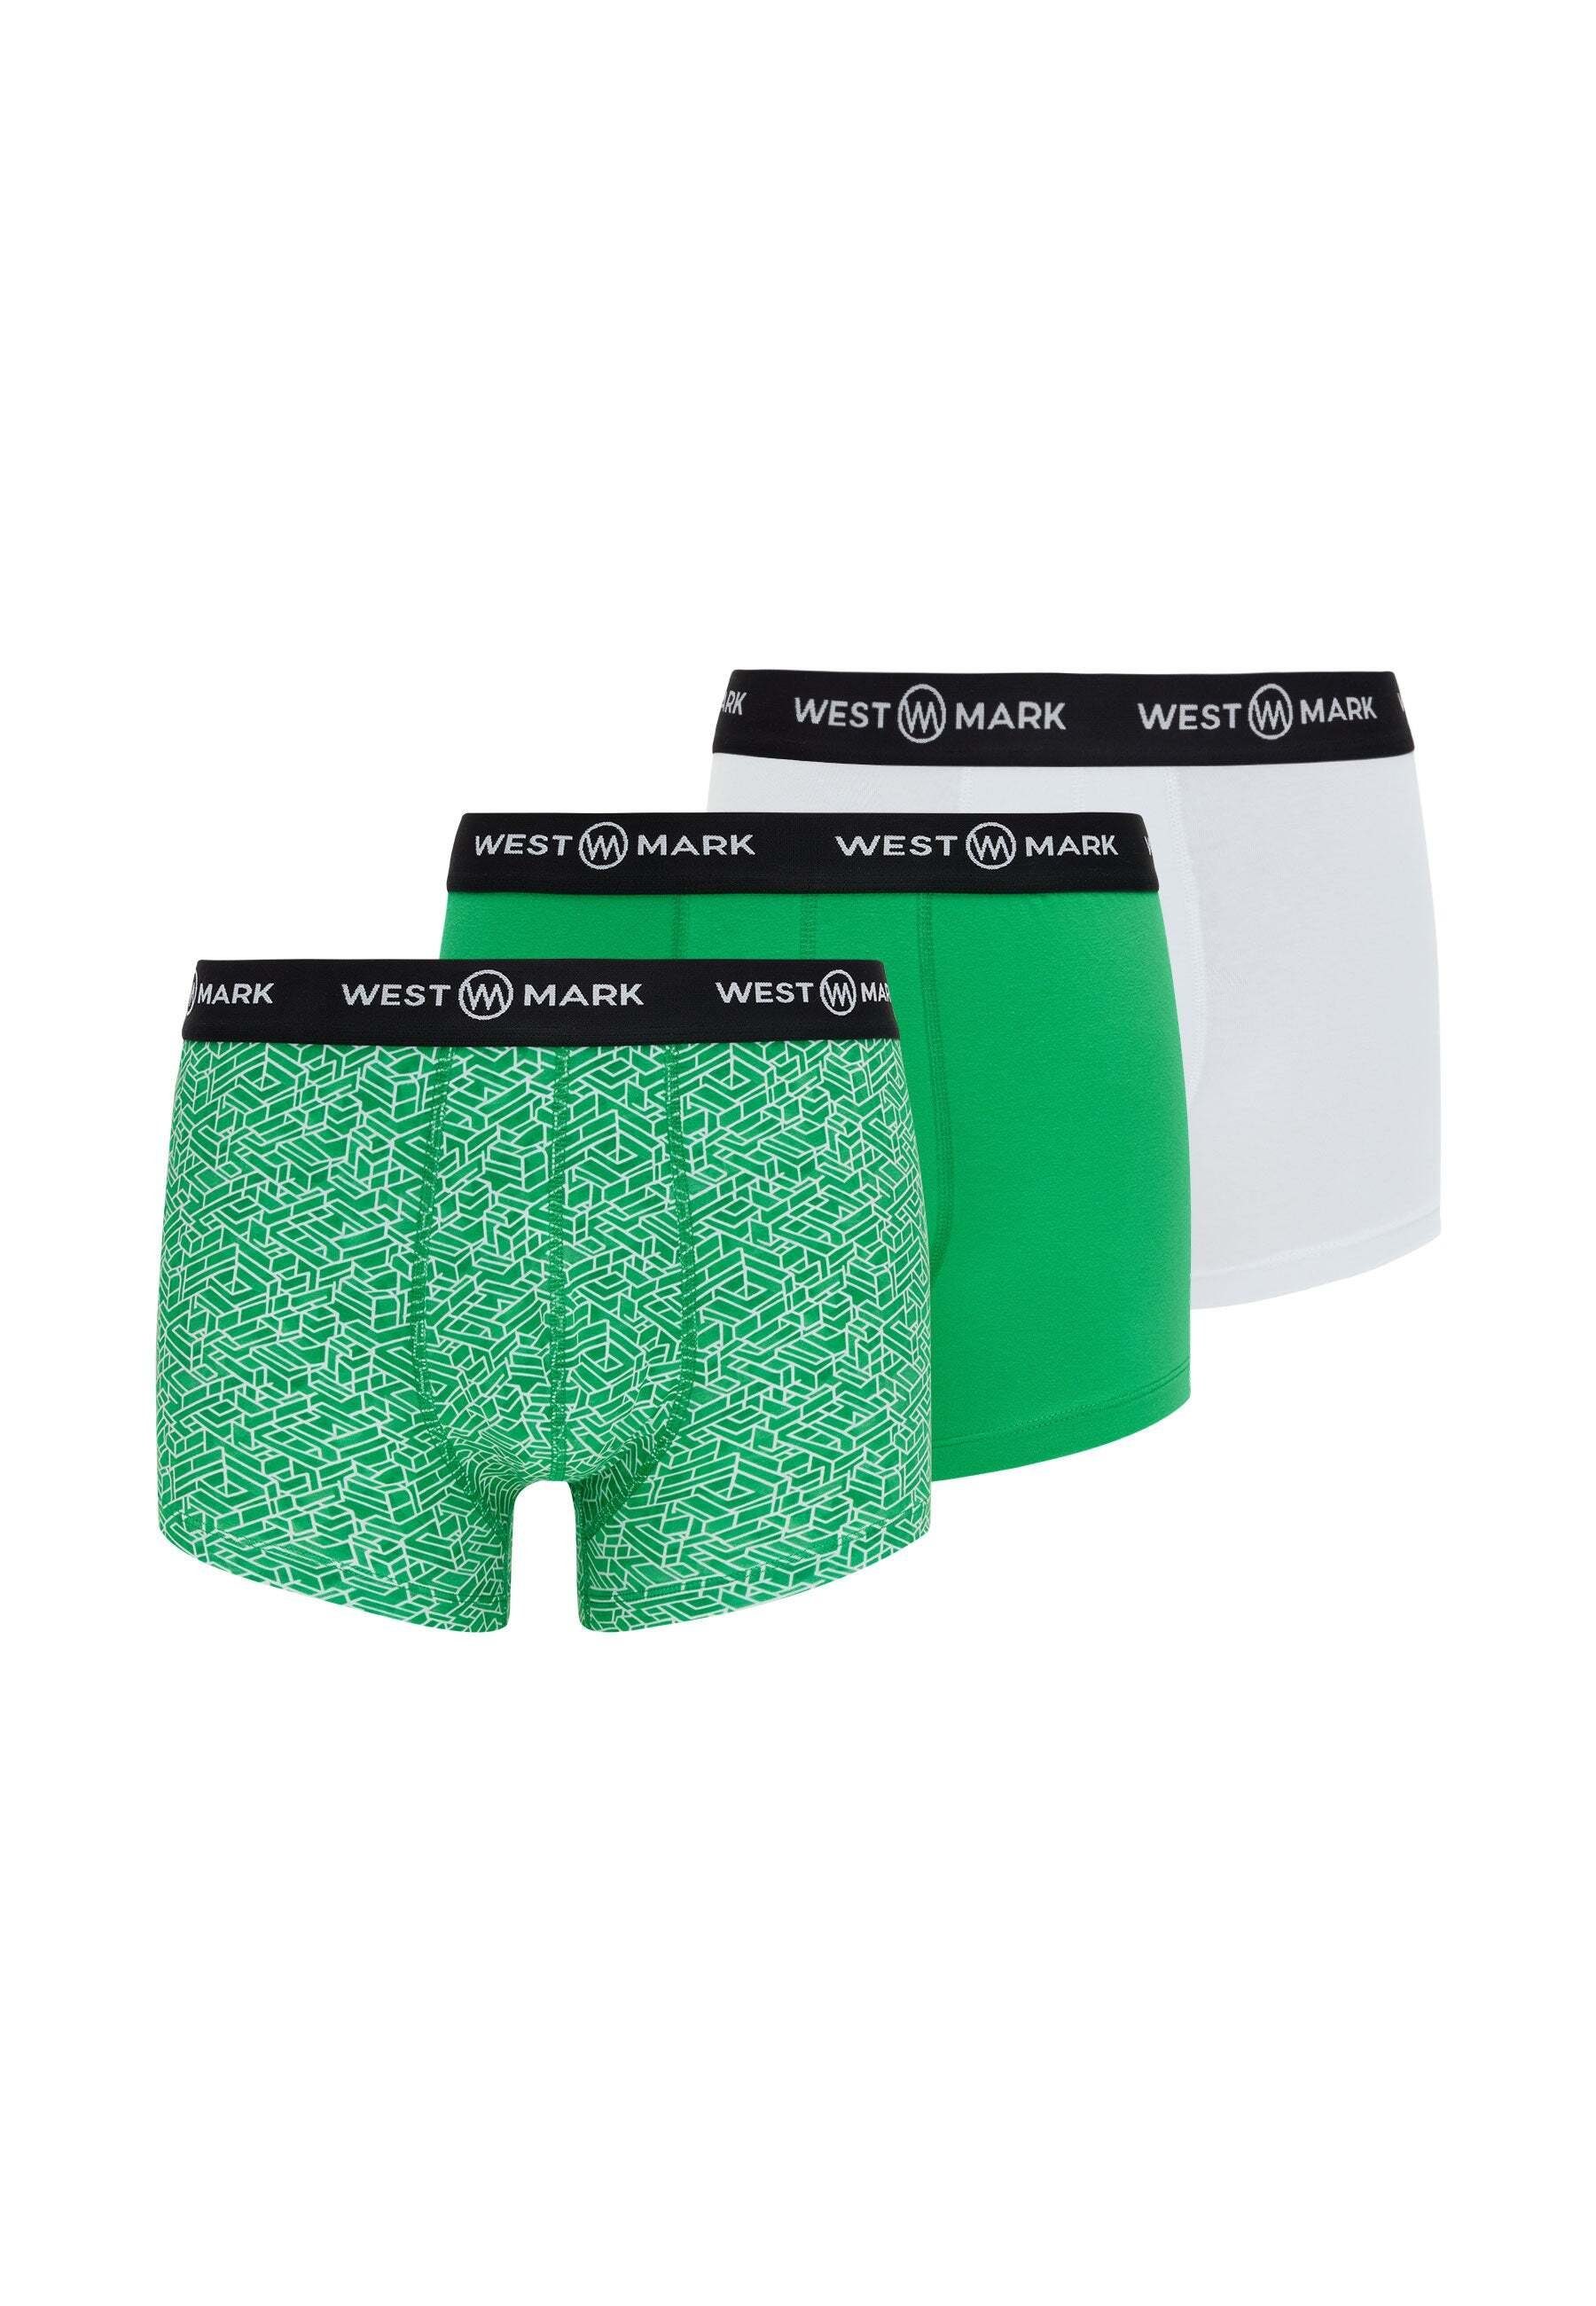 (3-PACK WMABSTRACT White LONDON Boxershorts WESTMARK 3-PACK OSCAR Set, AOP, 3-St) Green Green,